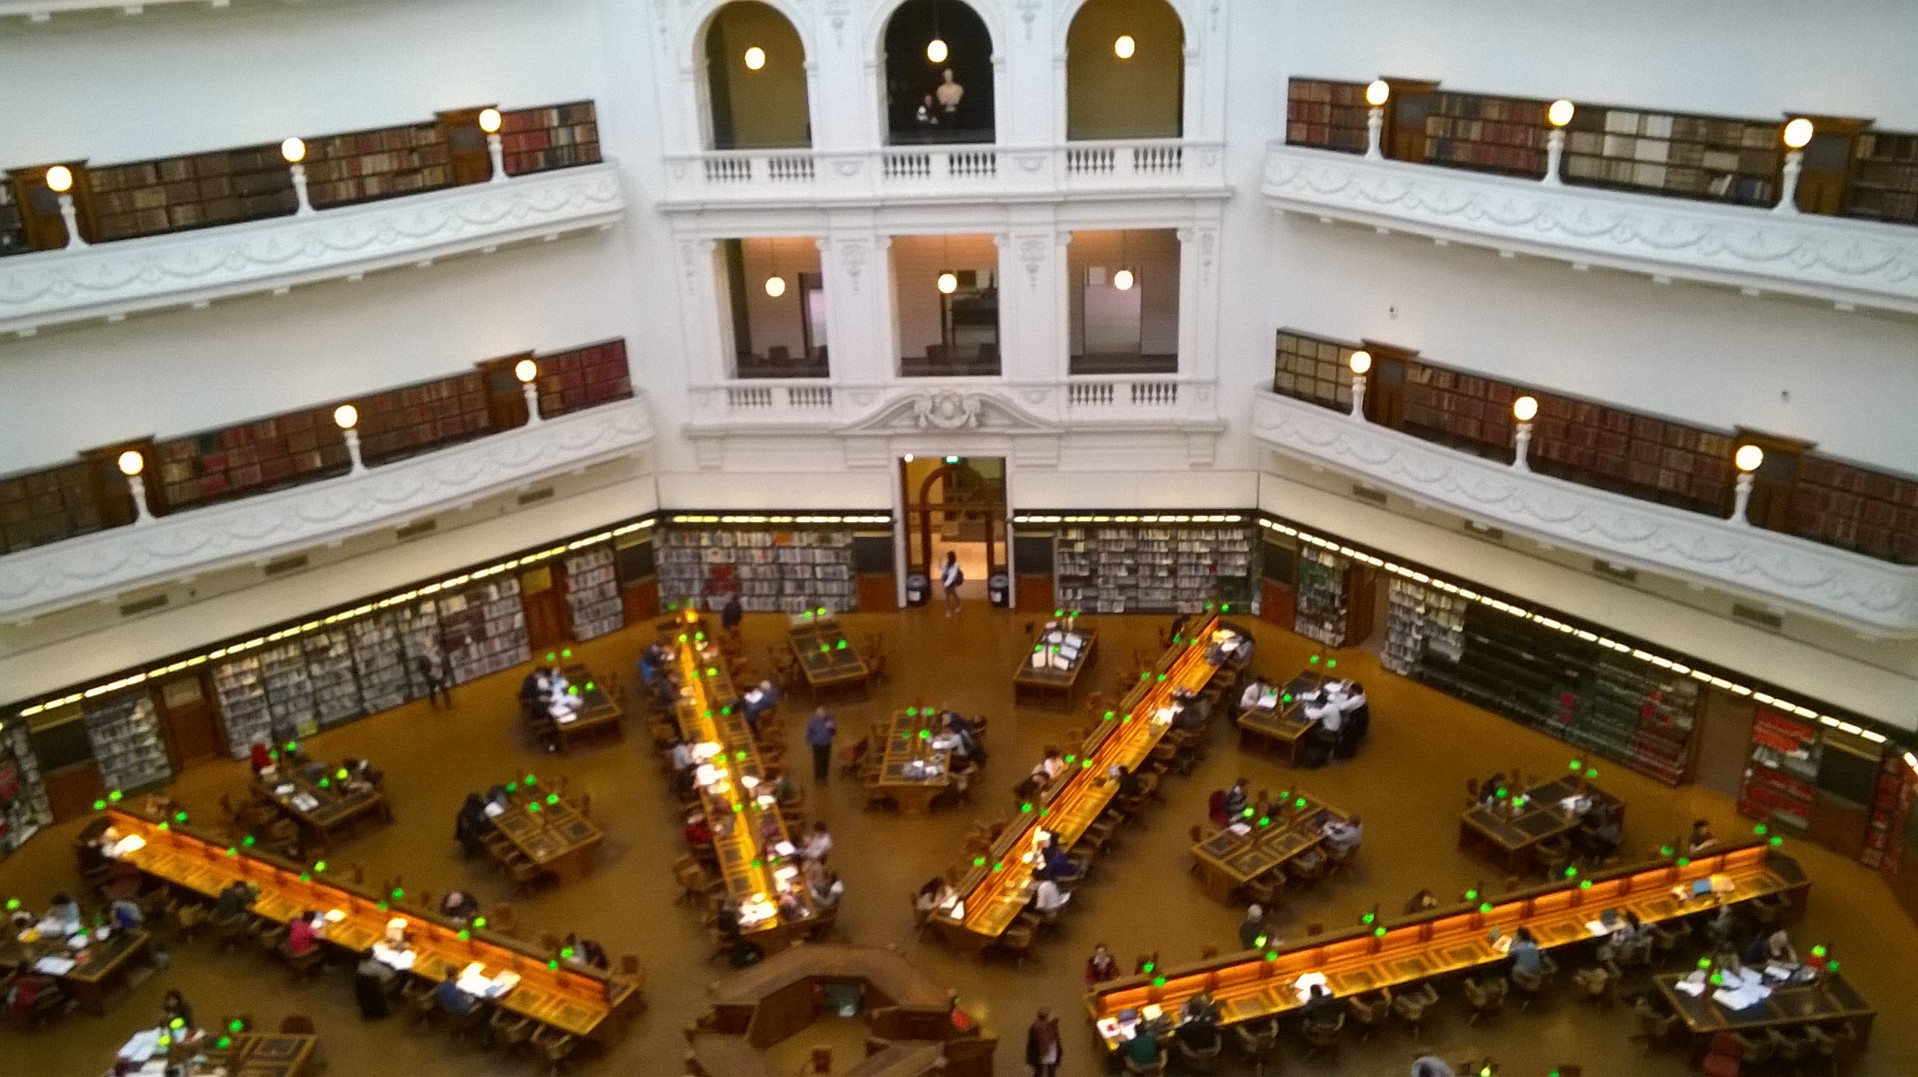 Victoria State Library, Melbourne, Australia by Val Mills